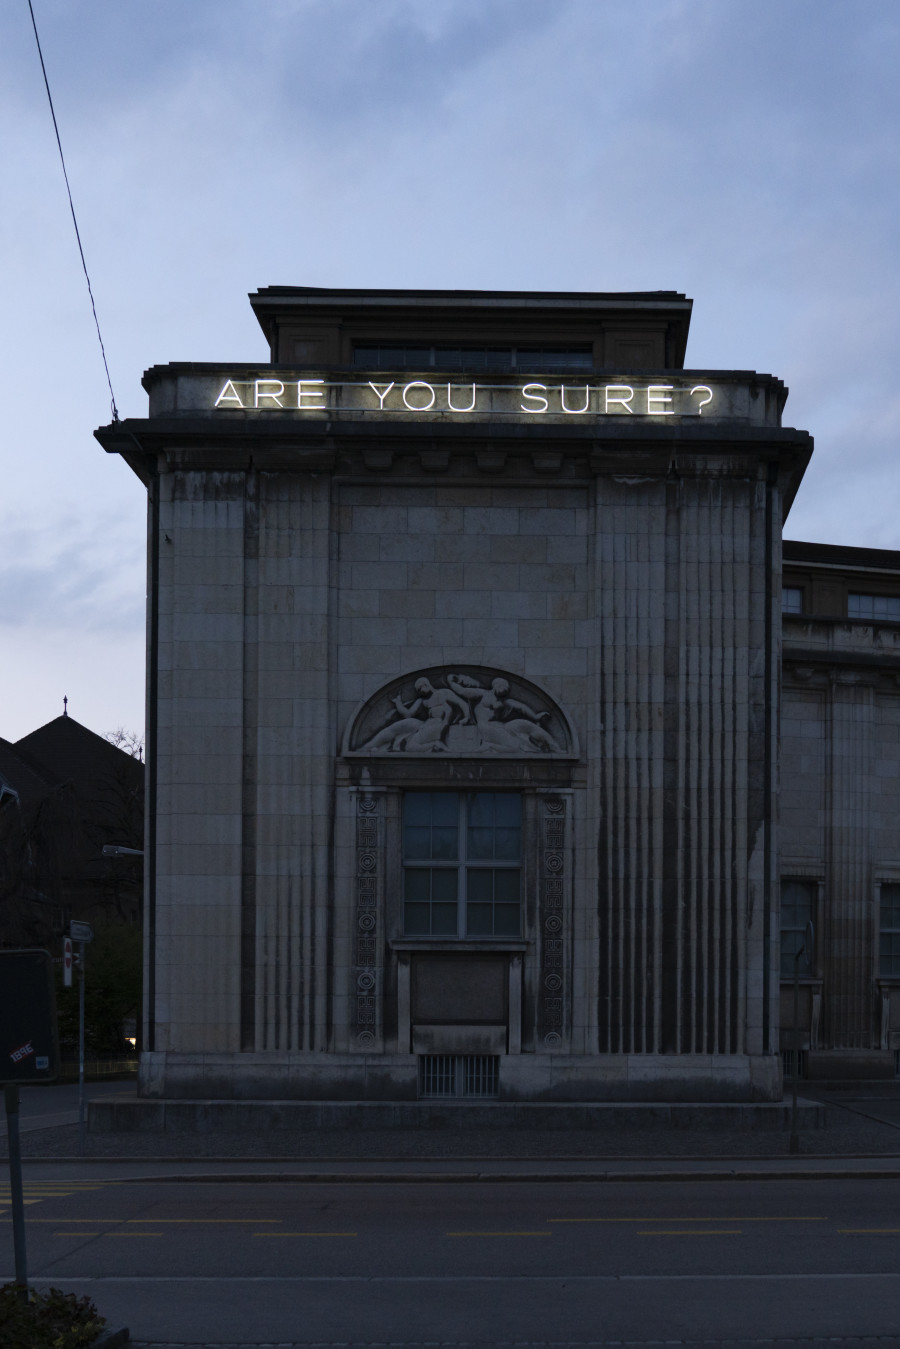 Bethan Huws, Untitled (A WORK OF ART WITHOUT EMOTION IS NOT A WORK OF ART / ARE YOU SURE?), 2020/2021, Kunst Museum Winterthur, Schenkung des Galerievereins, Freunde Kunst Museum Winterthur, 2021, ©2021, Bethan Huws / ProLitteris, Zurich Photos: Reto Kaufmann